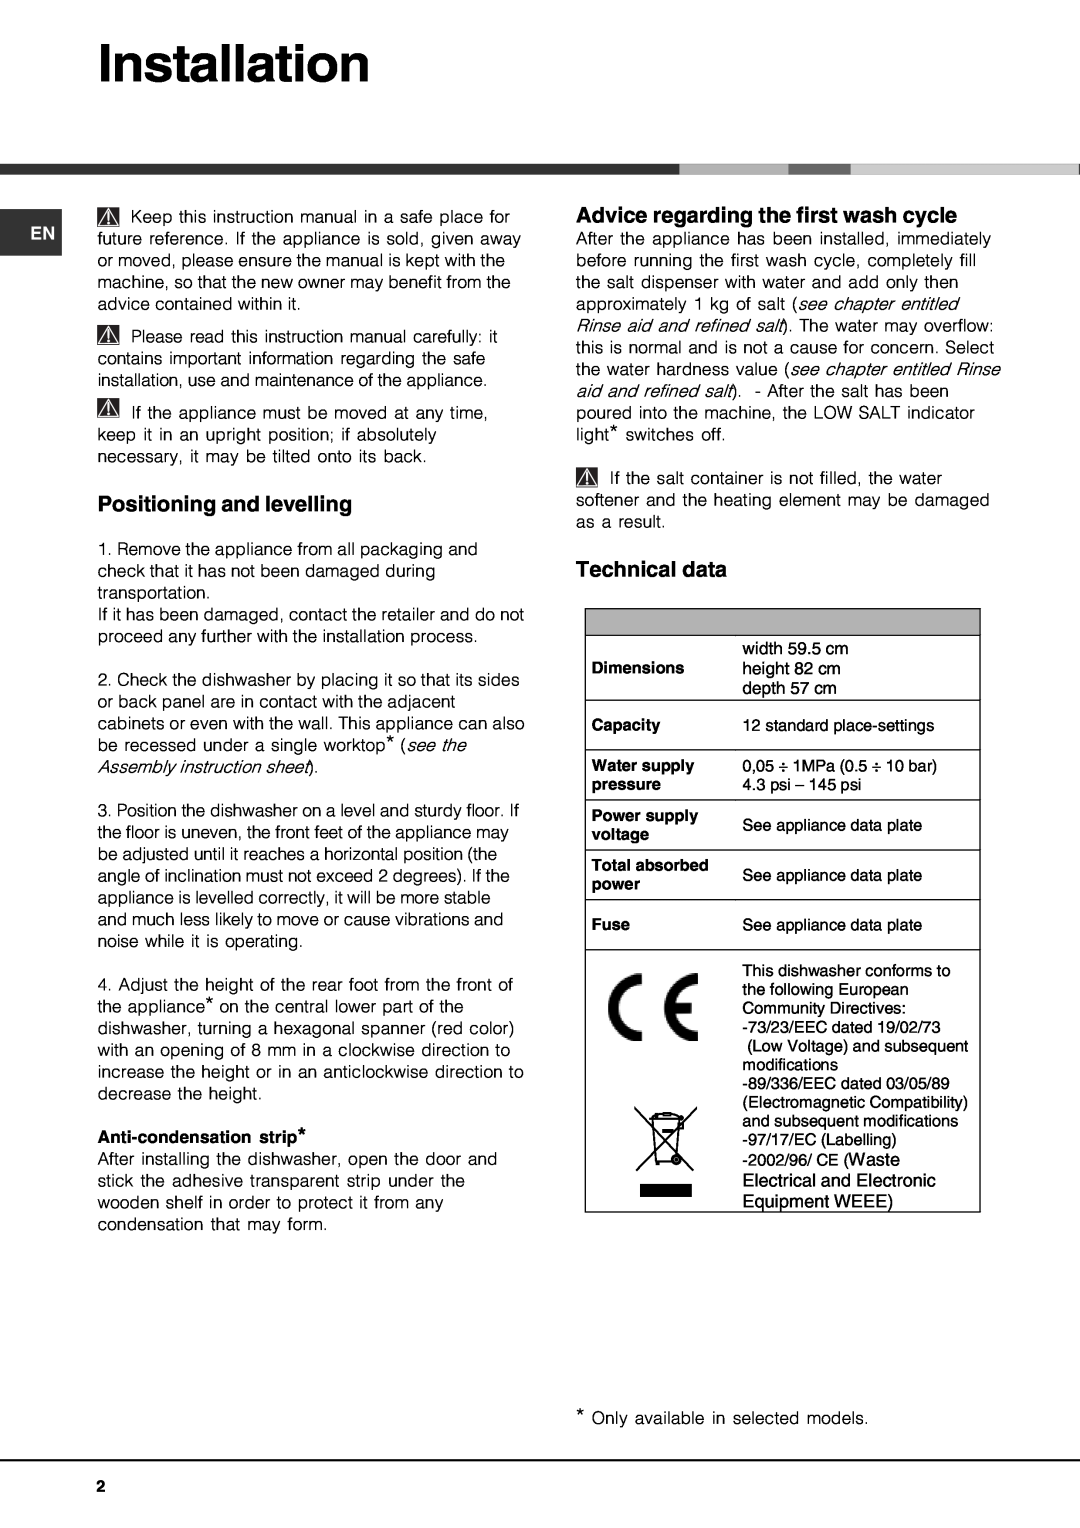 Hotpoint LFT 321 manual Installation, Positioning and levelling, Advice regarding the first wash cycle, Technical data 